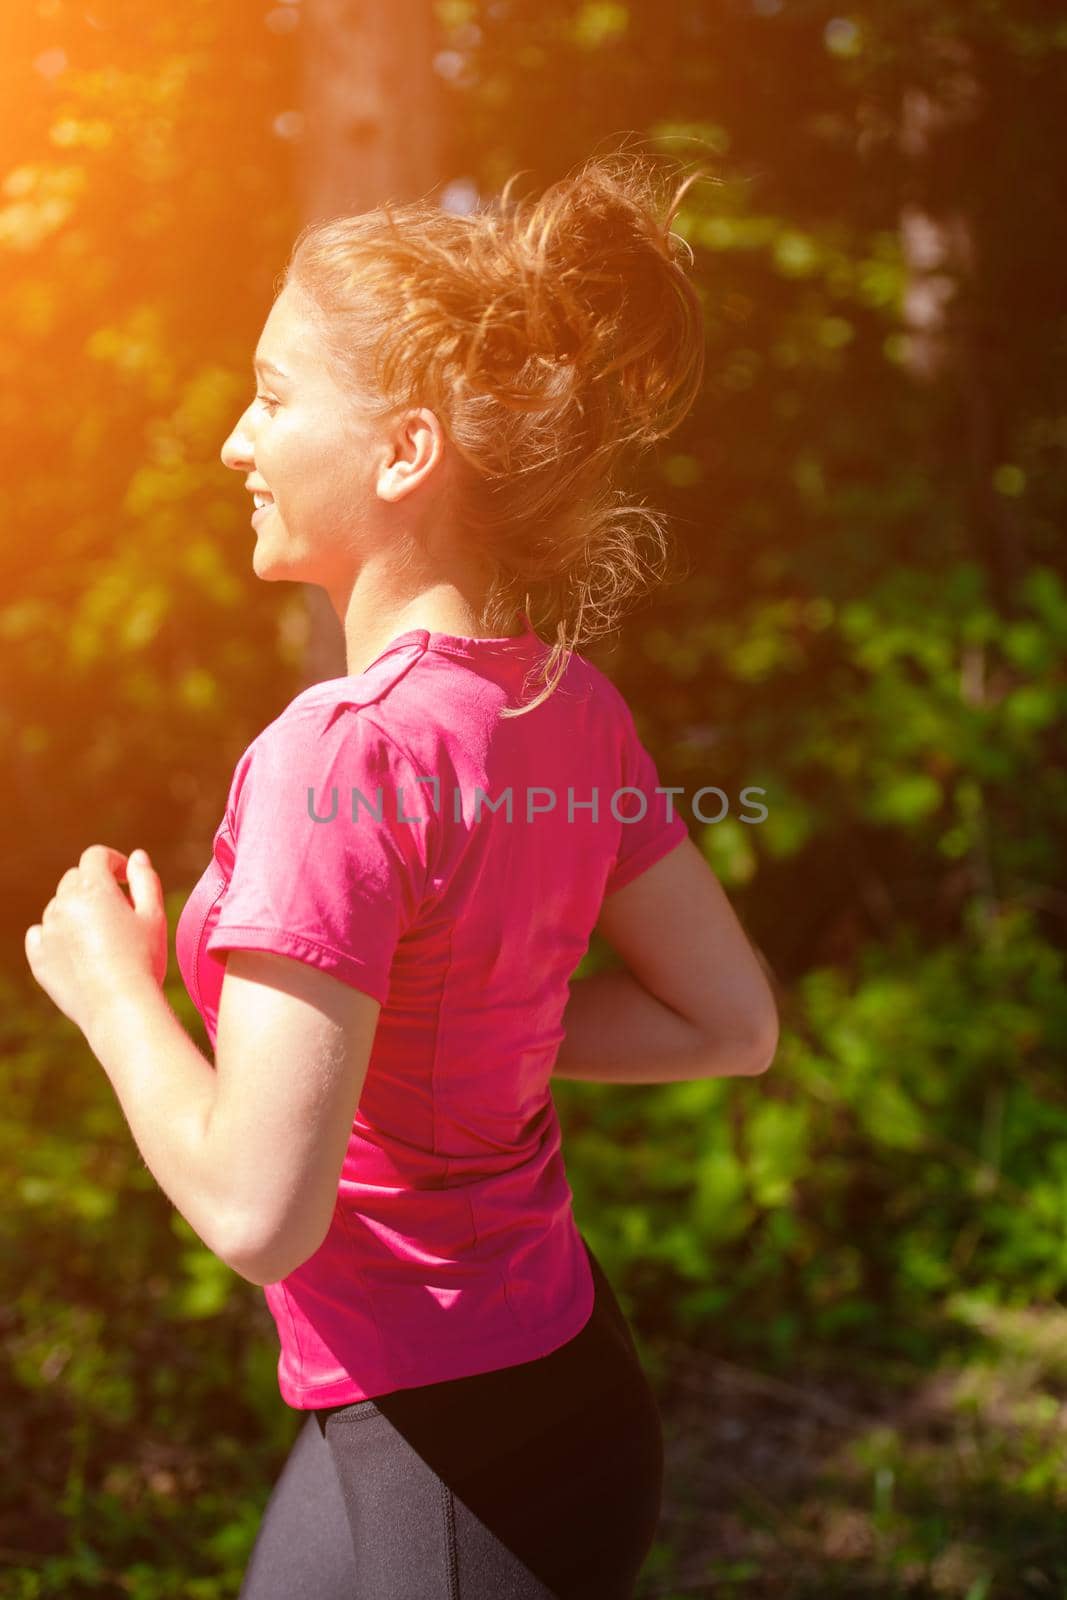 young happy woman enjoying in a healthy lifestyle while jogging on a country road through the beautiful sunny forest, exercise and fitness concept